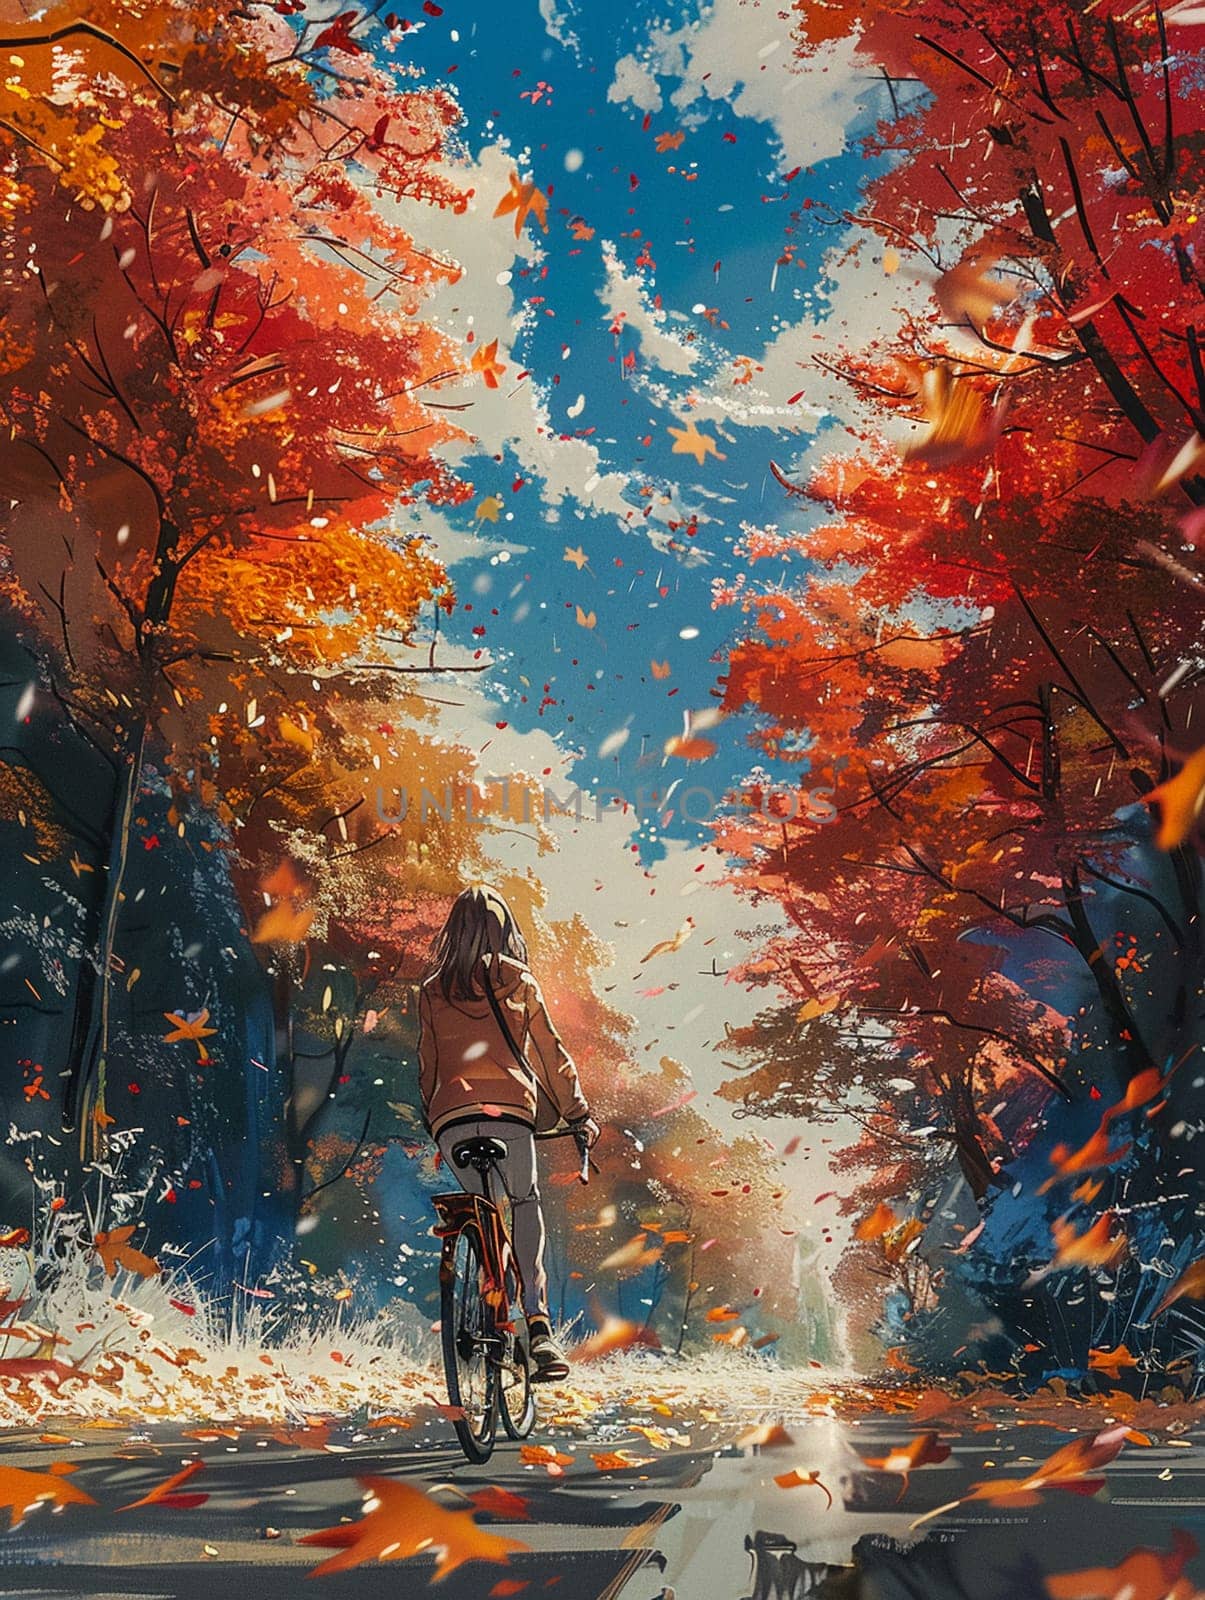 Bicycle ride through falling leaves captured in an anime-style by Benzoix